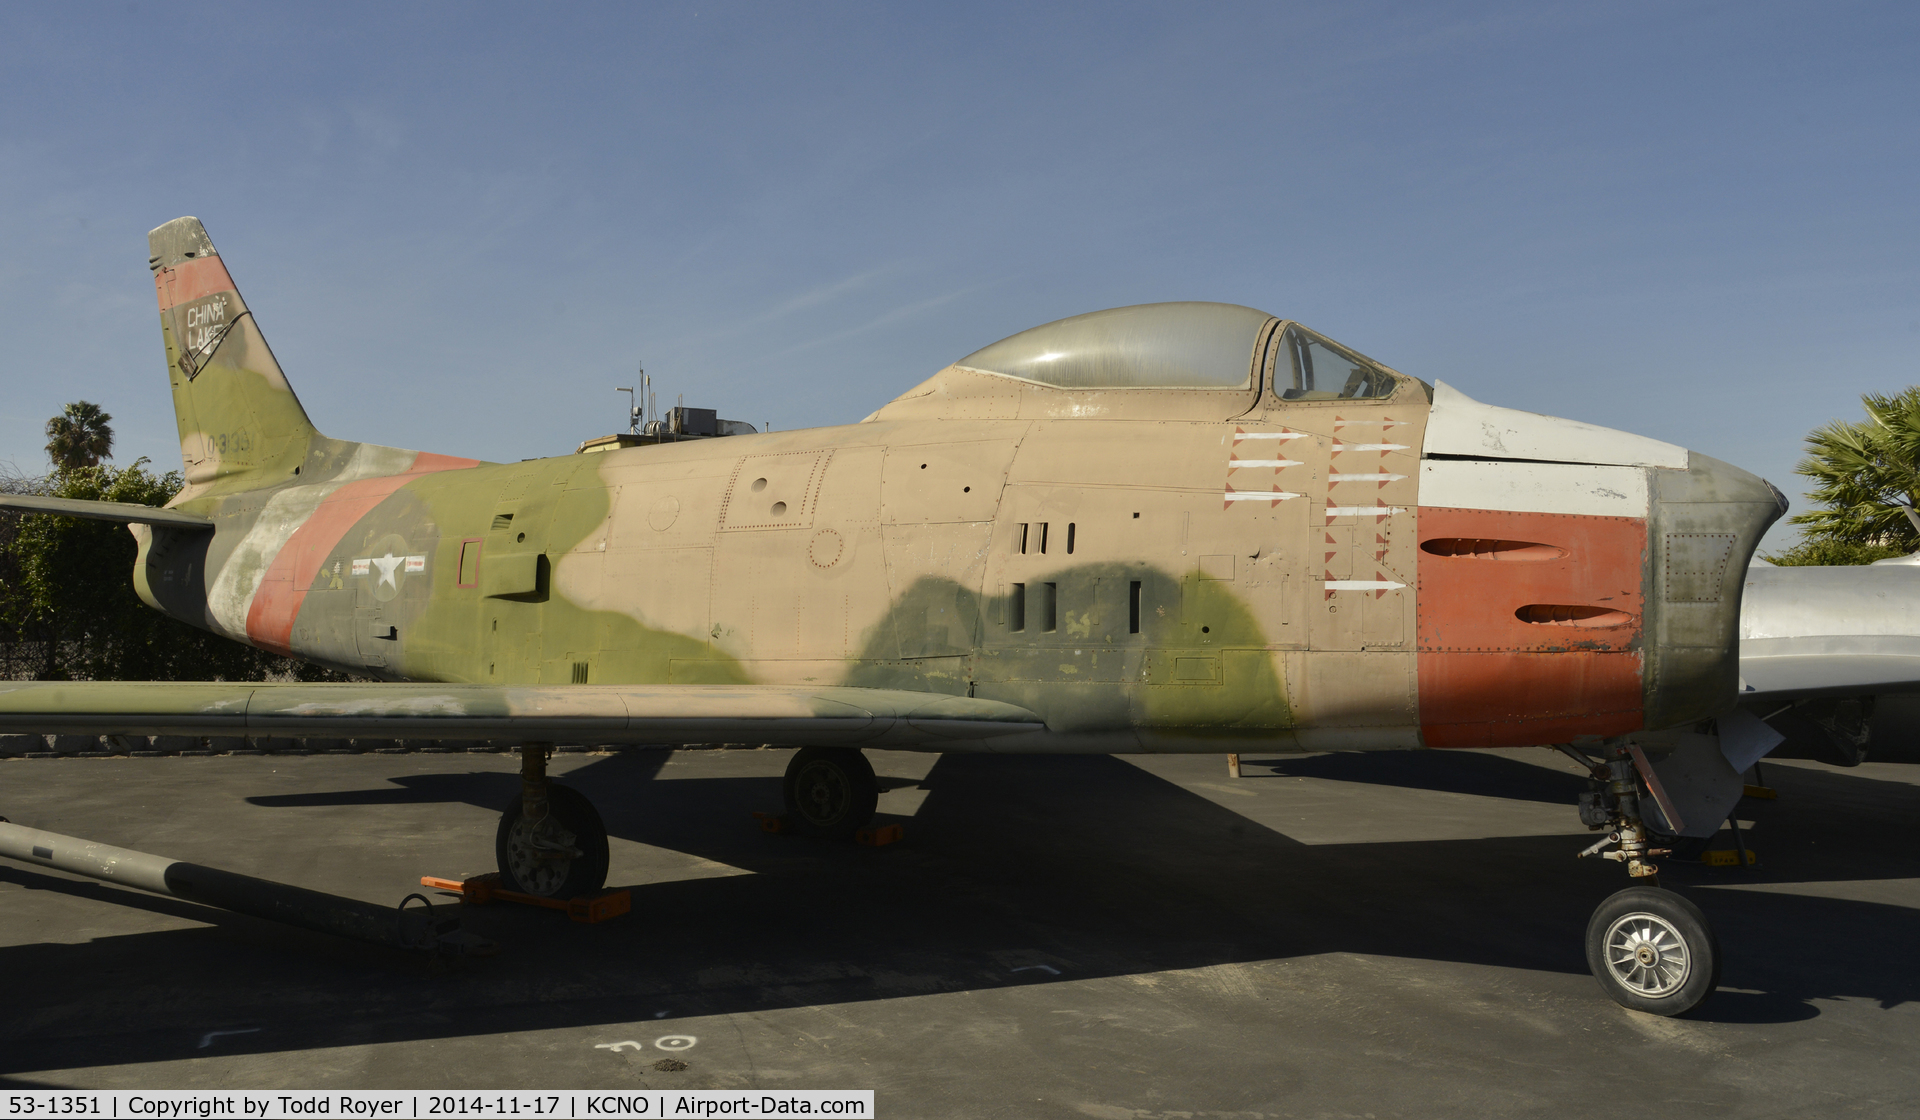 53-1351, 1953 North American QF-86H Sabre C/N 203-123, On display at the Planes of Fame Chino location